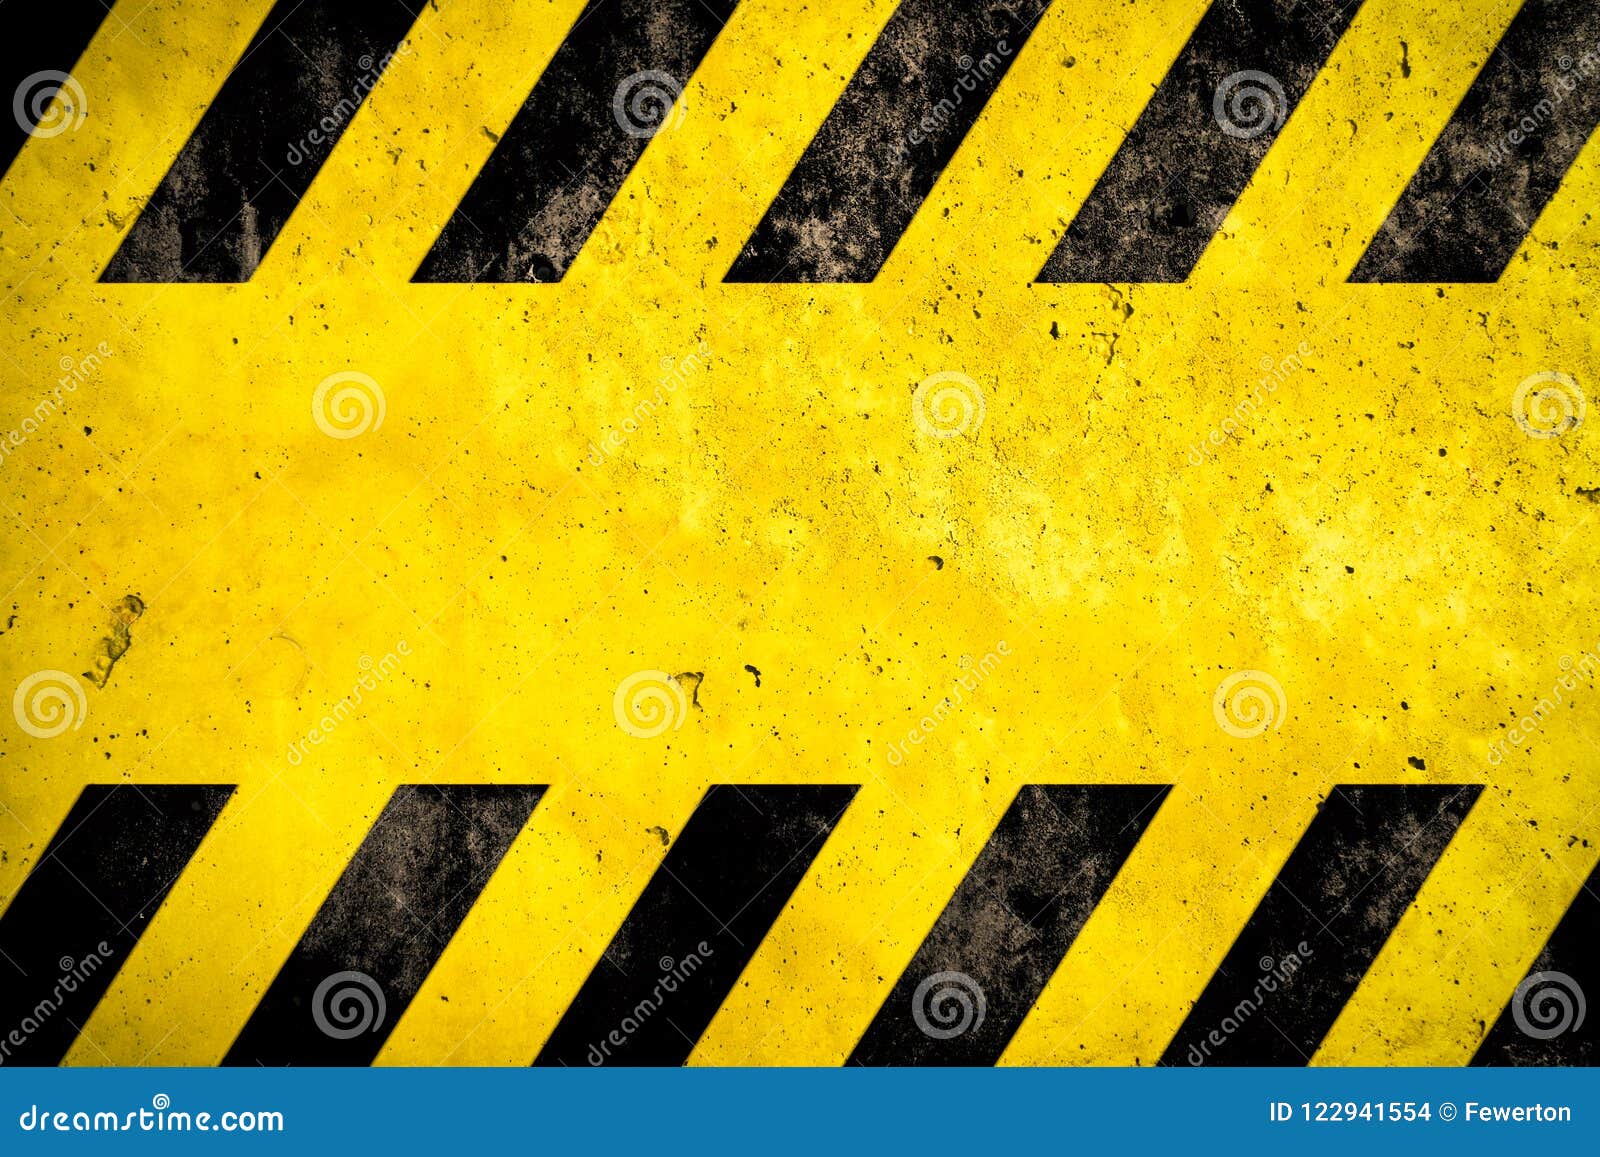 warning background danger caution yellow black stripes painted over yellow concrete wall texture empty space text message